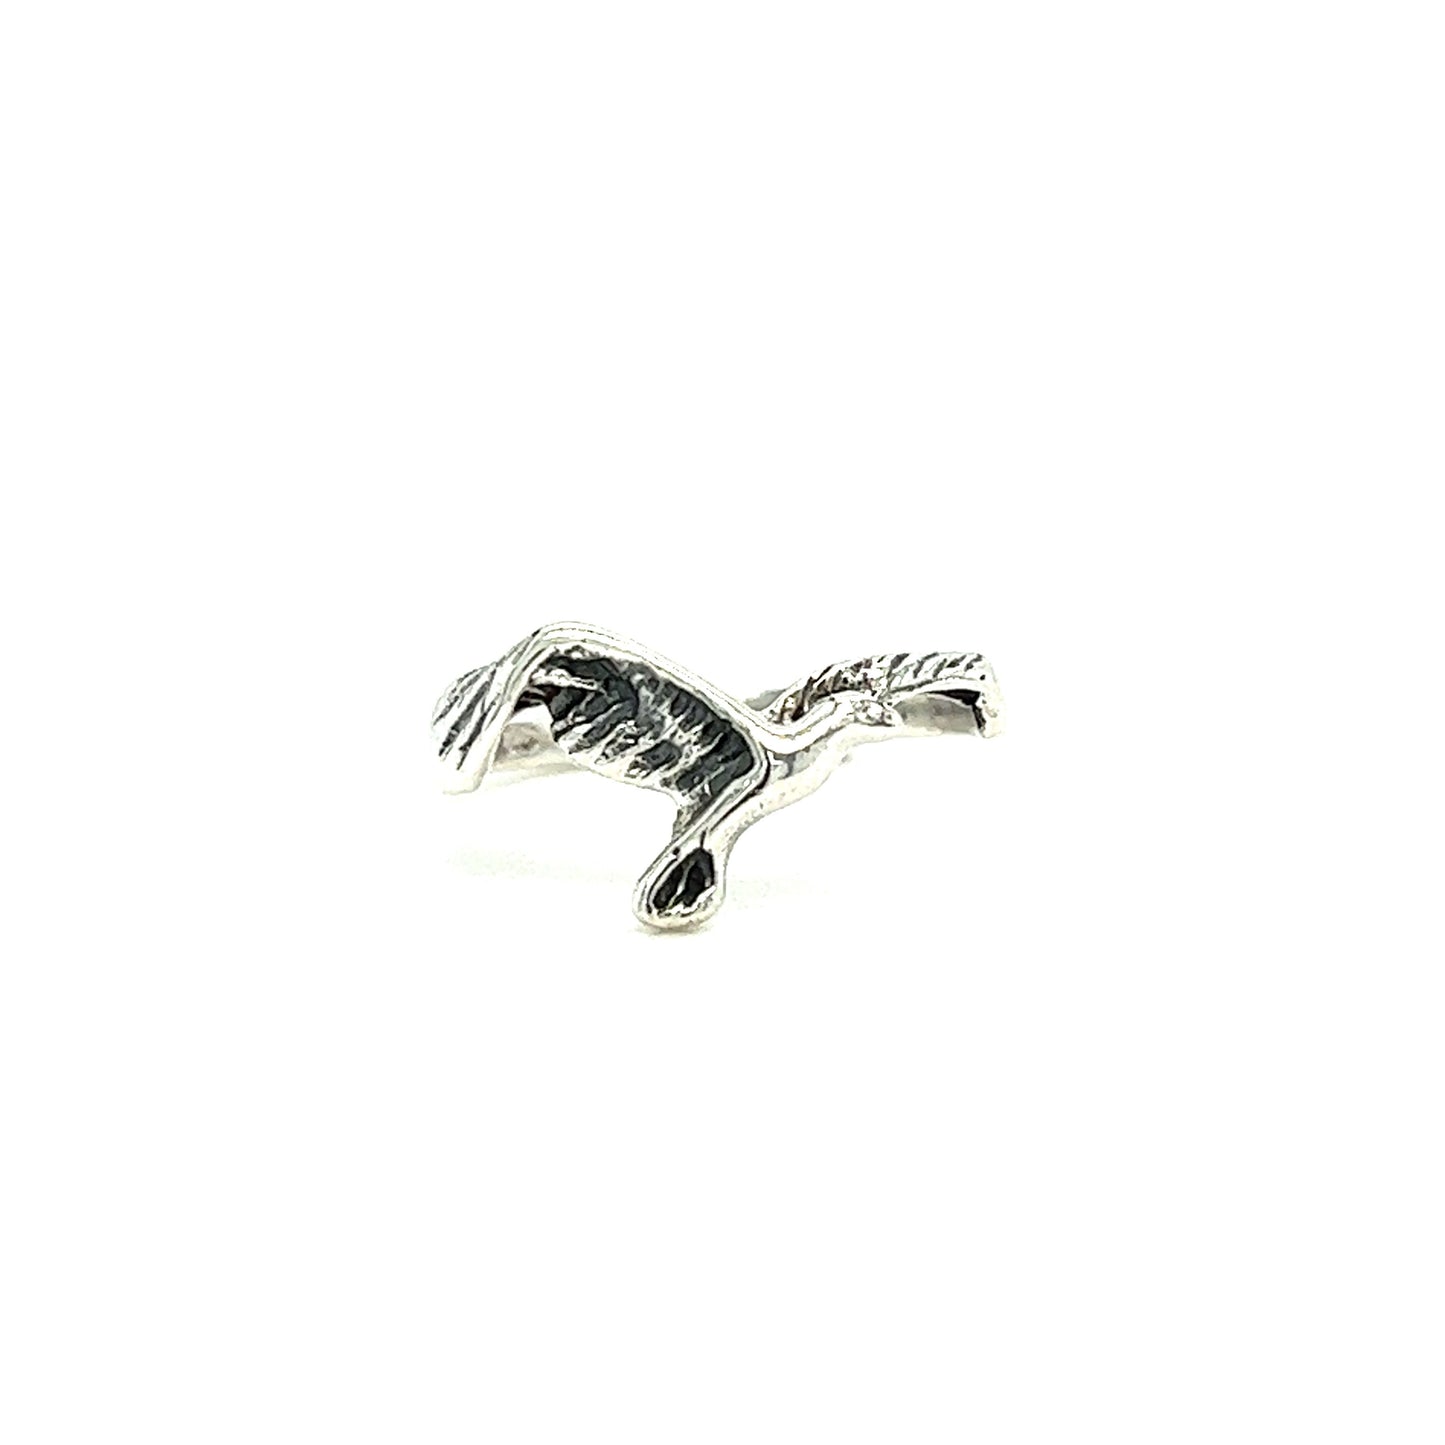 A Dainty Flying Seagull ring by Super Silver.